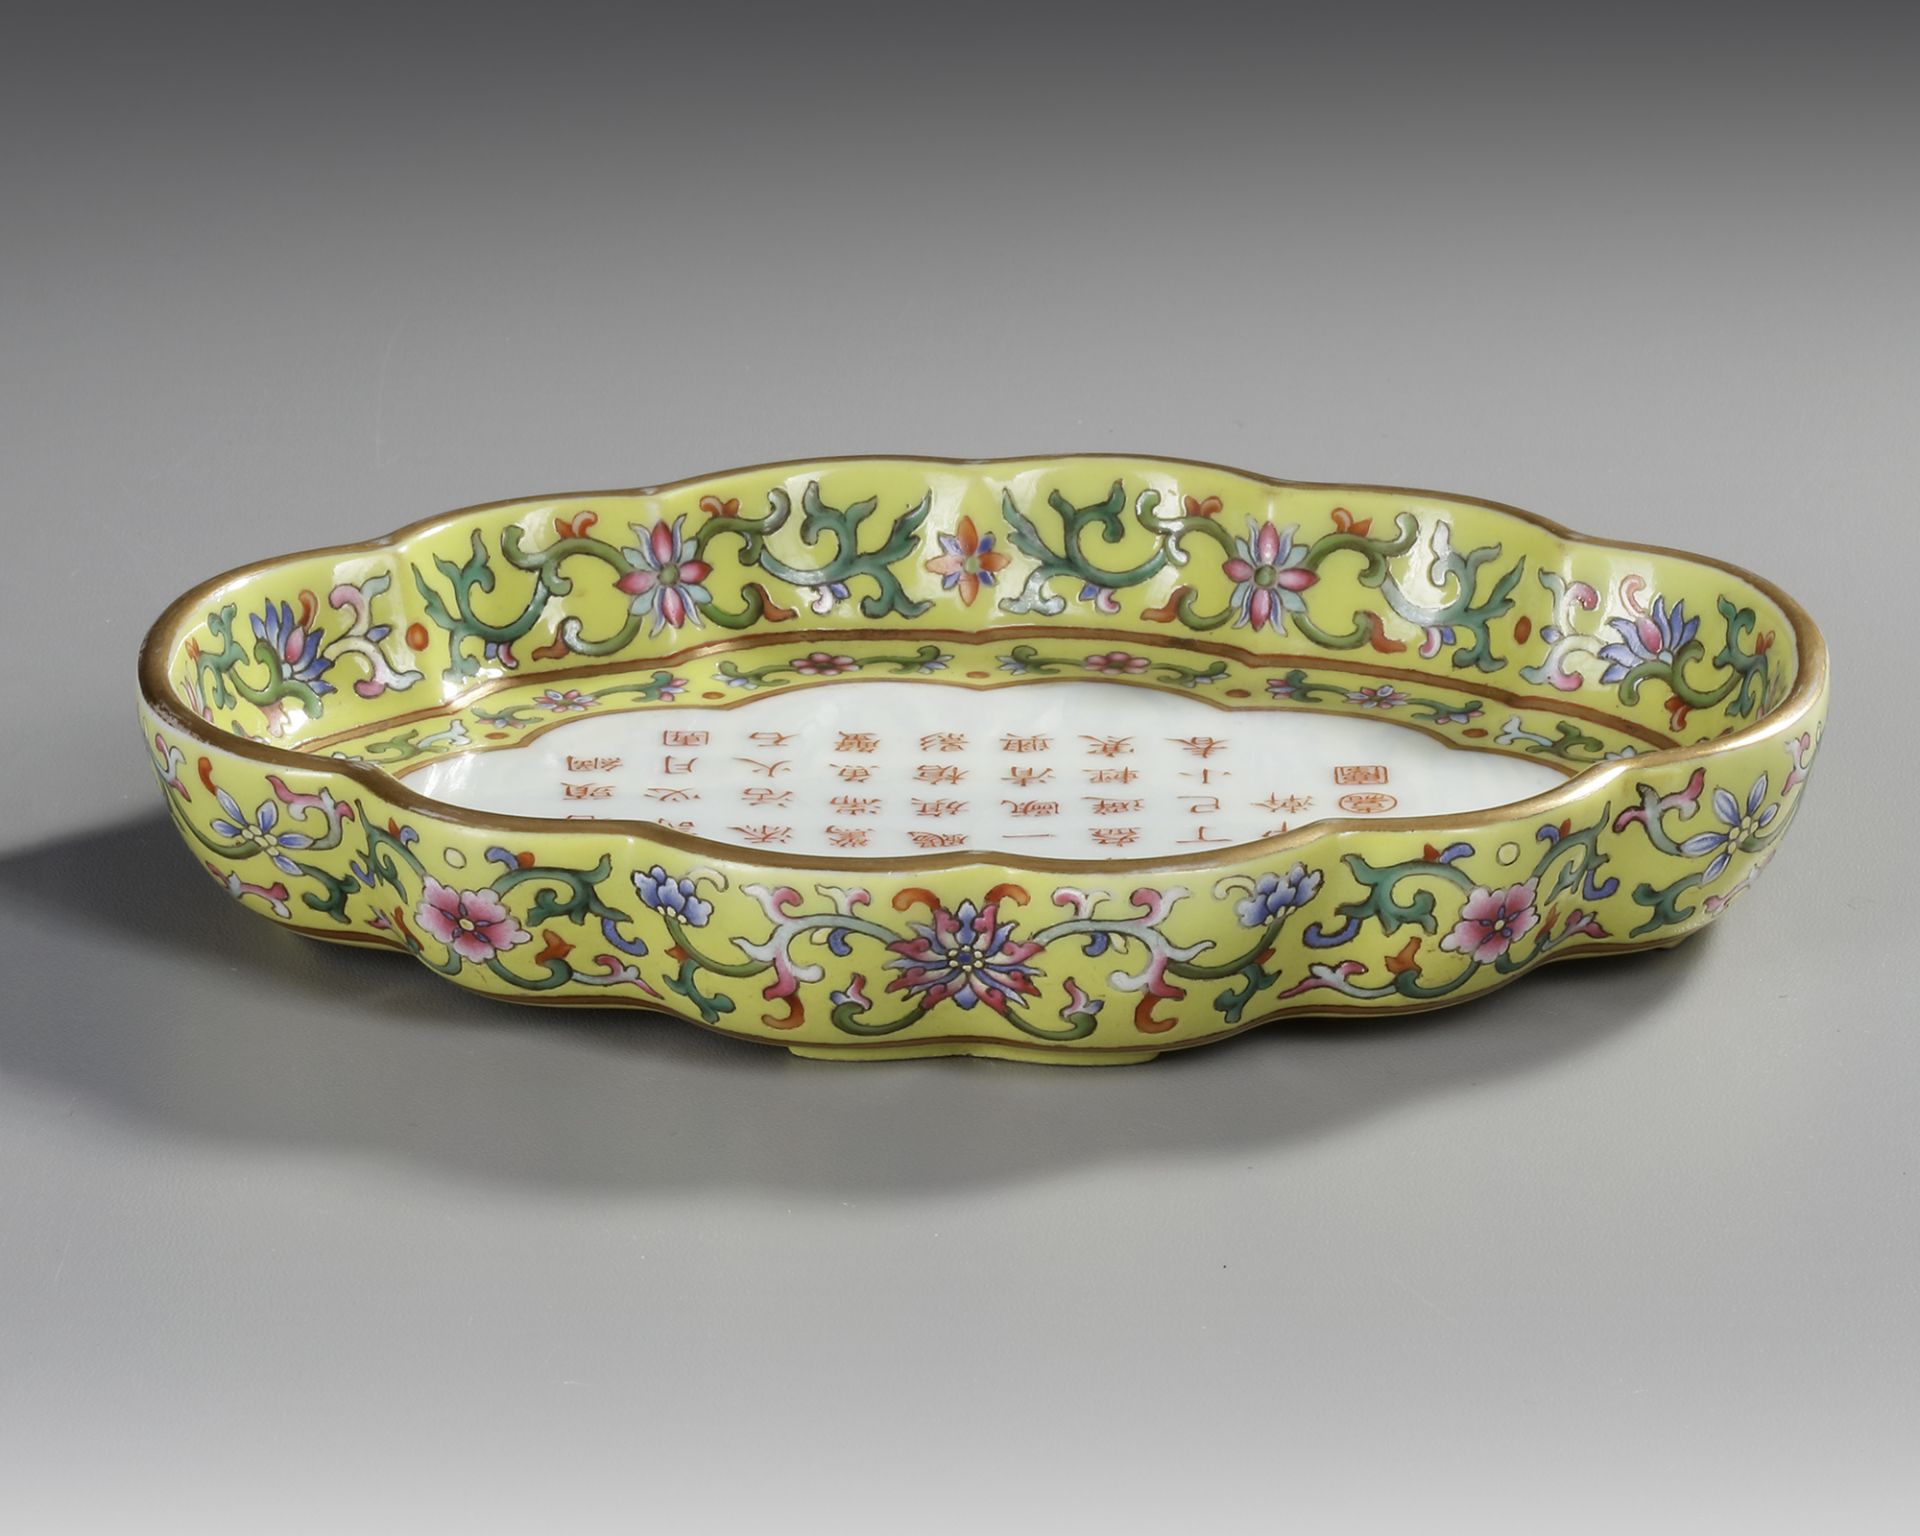 A CHINESE YELLOW-GROUND FAMILLE ROSE "TEA POEM" FOLIATE TRAY, QING DYNASTY (1636–1912) - Bild 3 aus 3